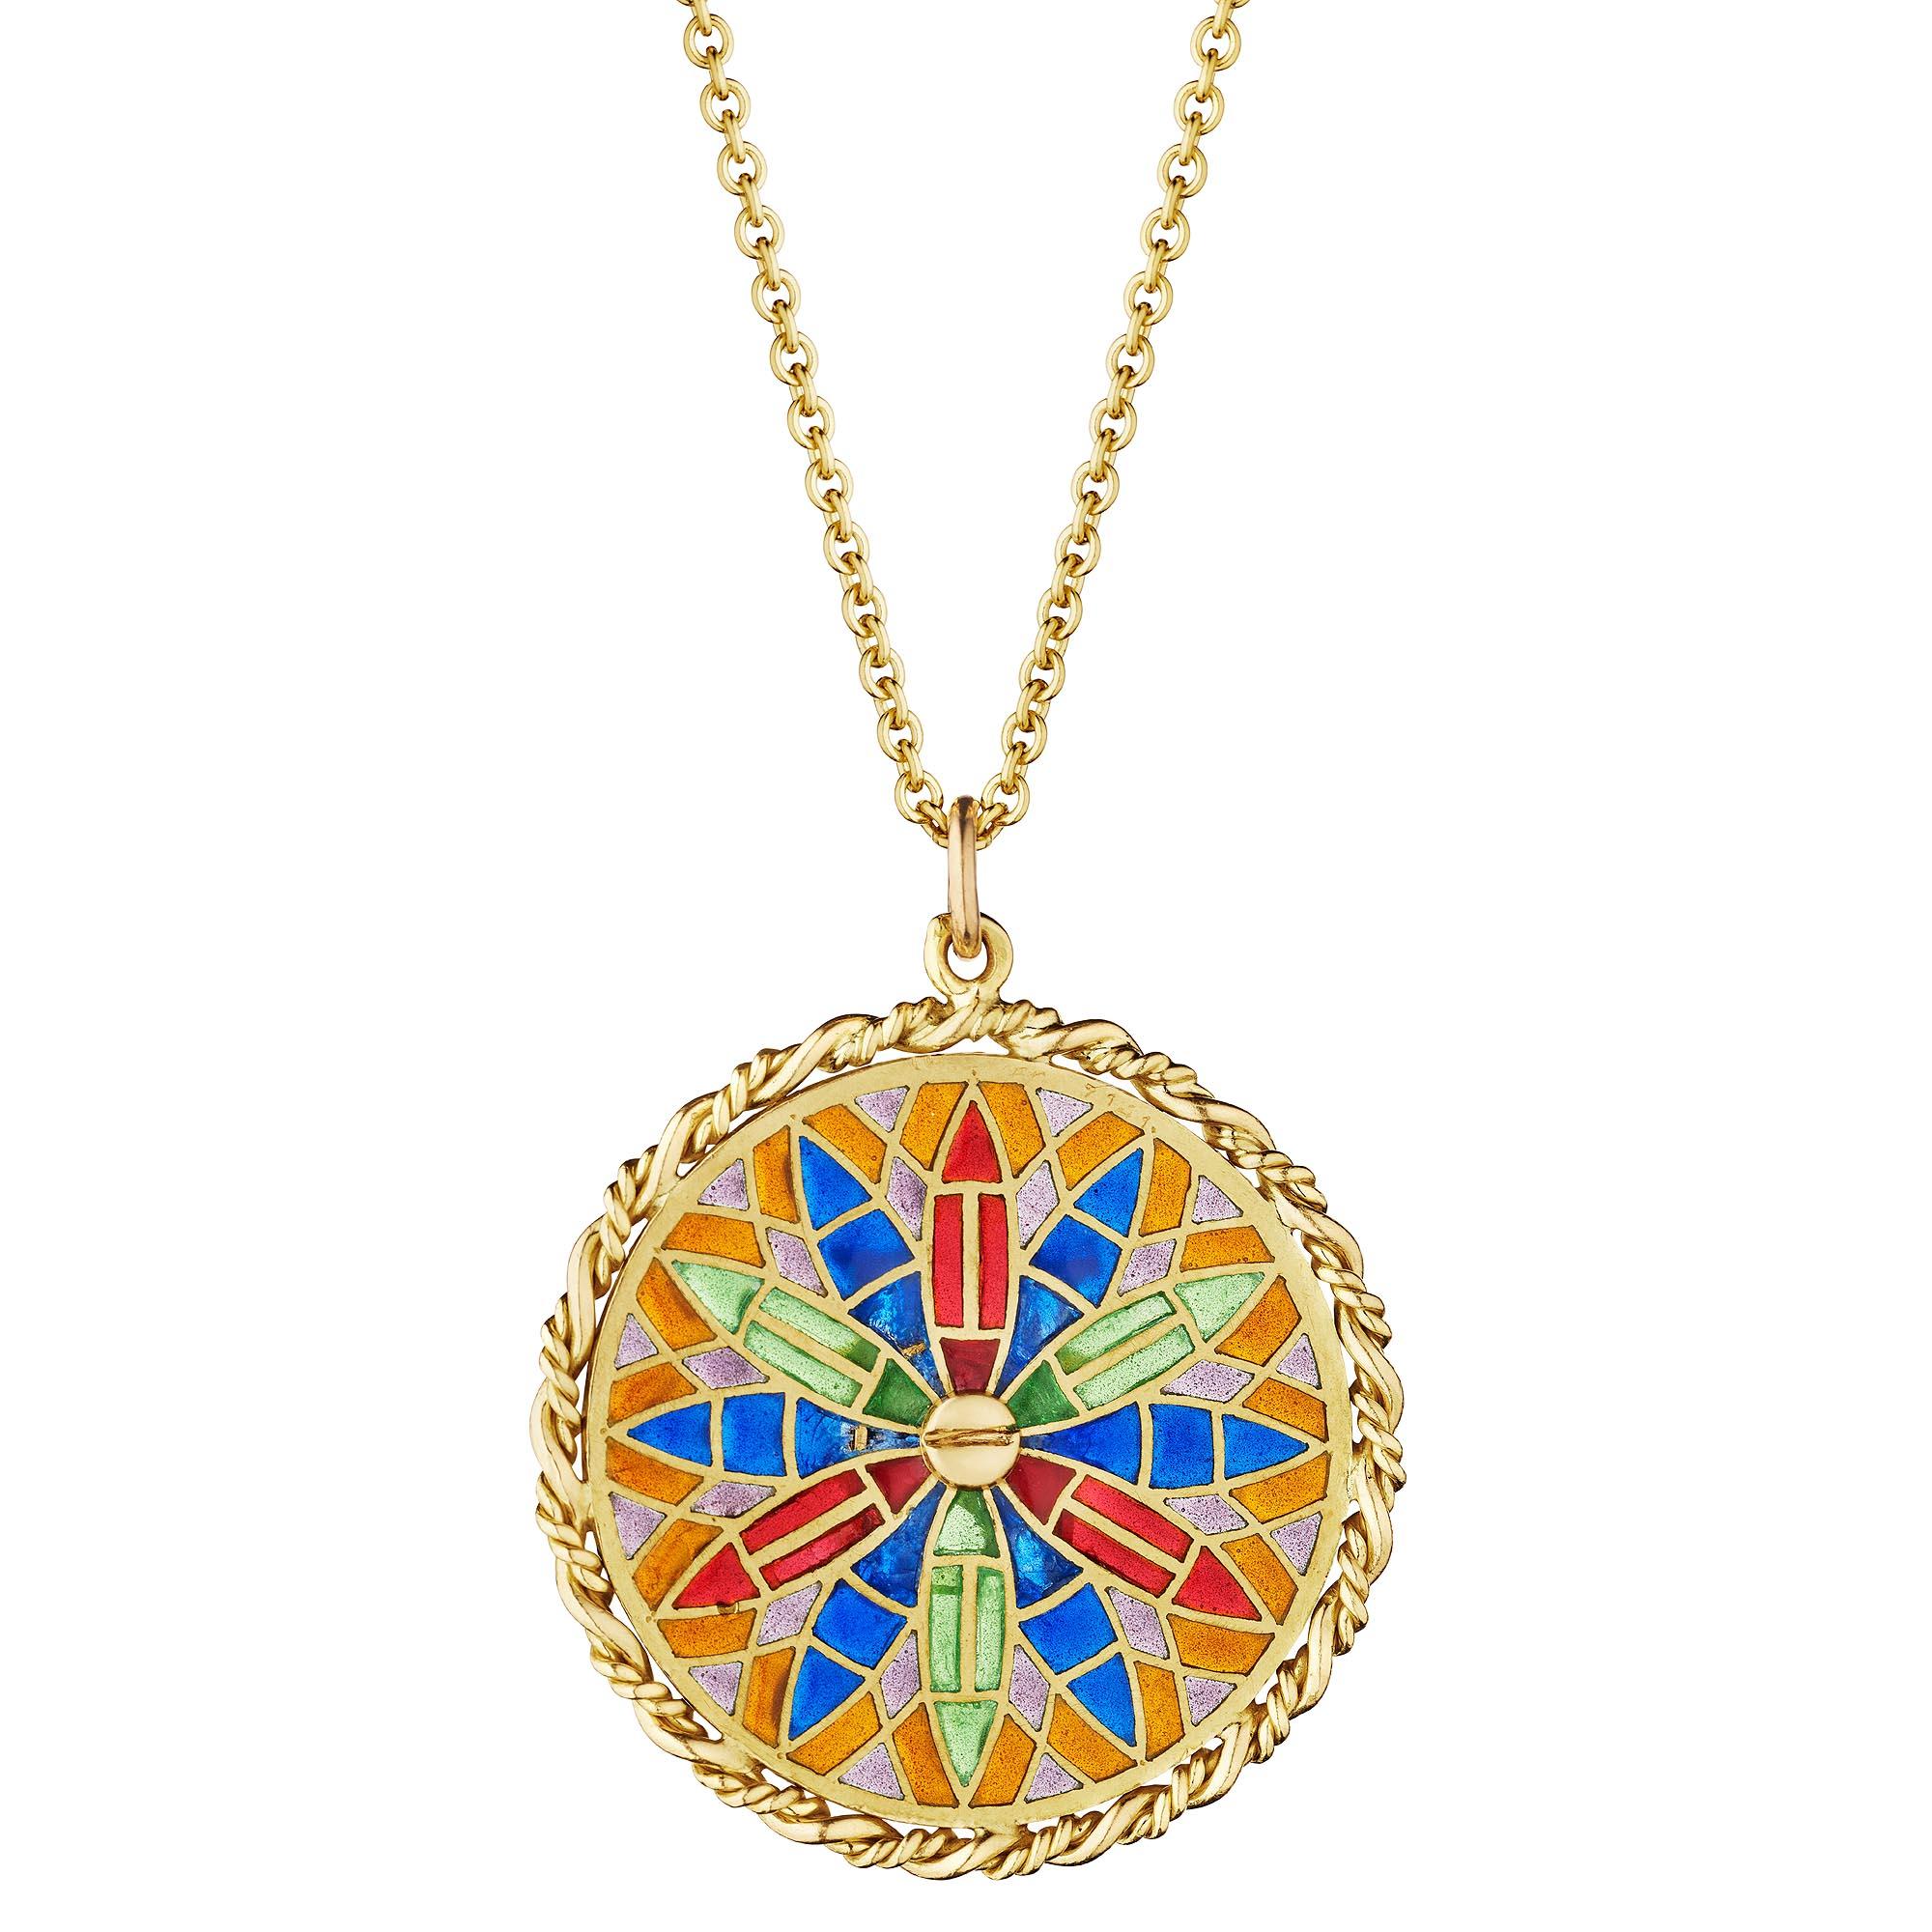 The cathedral of Notre Dame, a symbol of France, reflects peace and harmony, and this Cartier vintage gold and plique-a-jour enamel charm pendant necklace honors that powerful image.  With a stained glass style enamel patterned background featuring